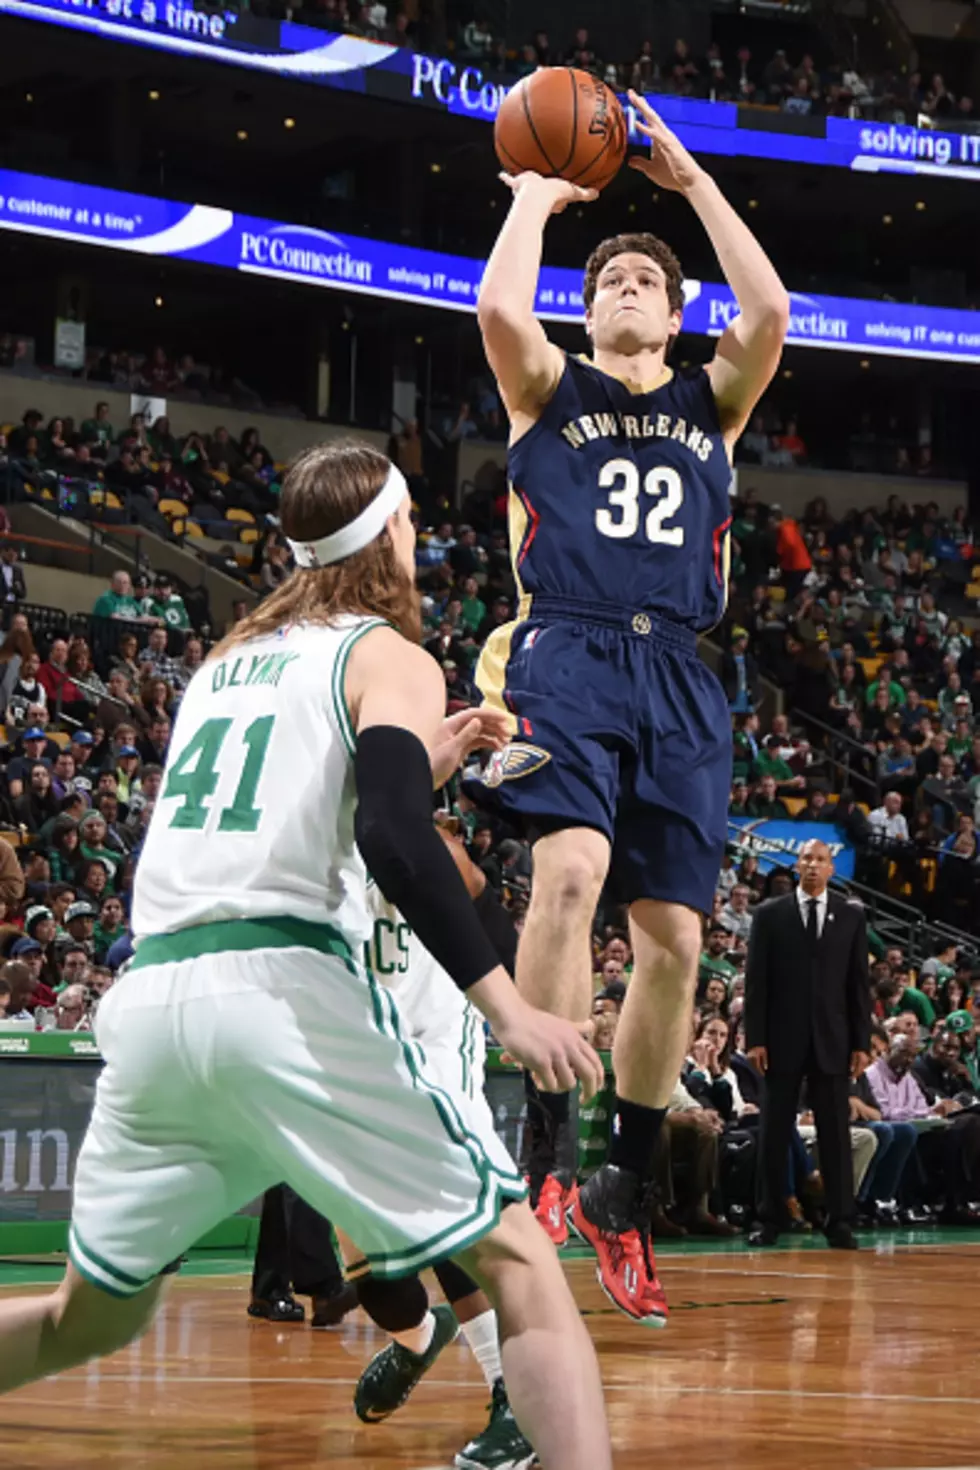 Fredette Featured in 'Vice Sports' Doc. (VIDEO)